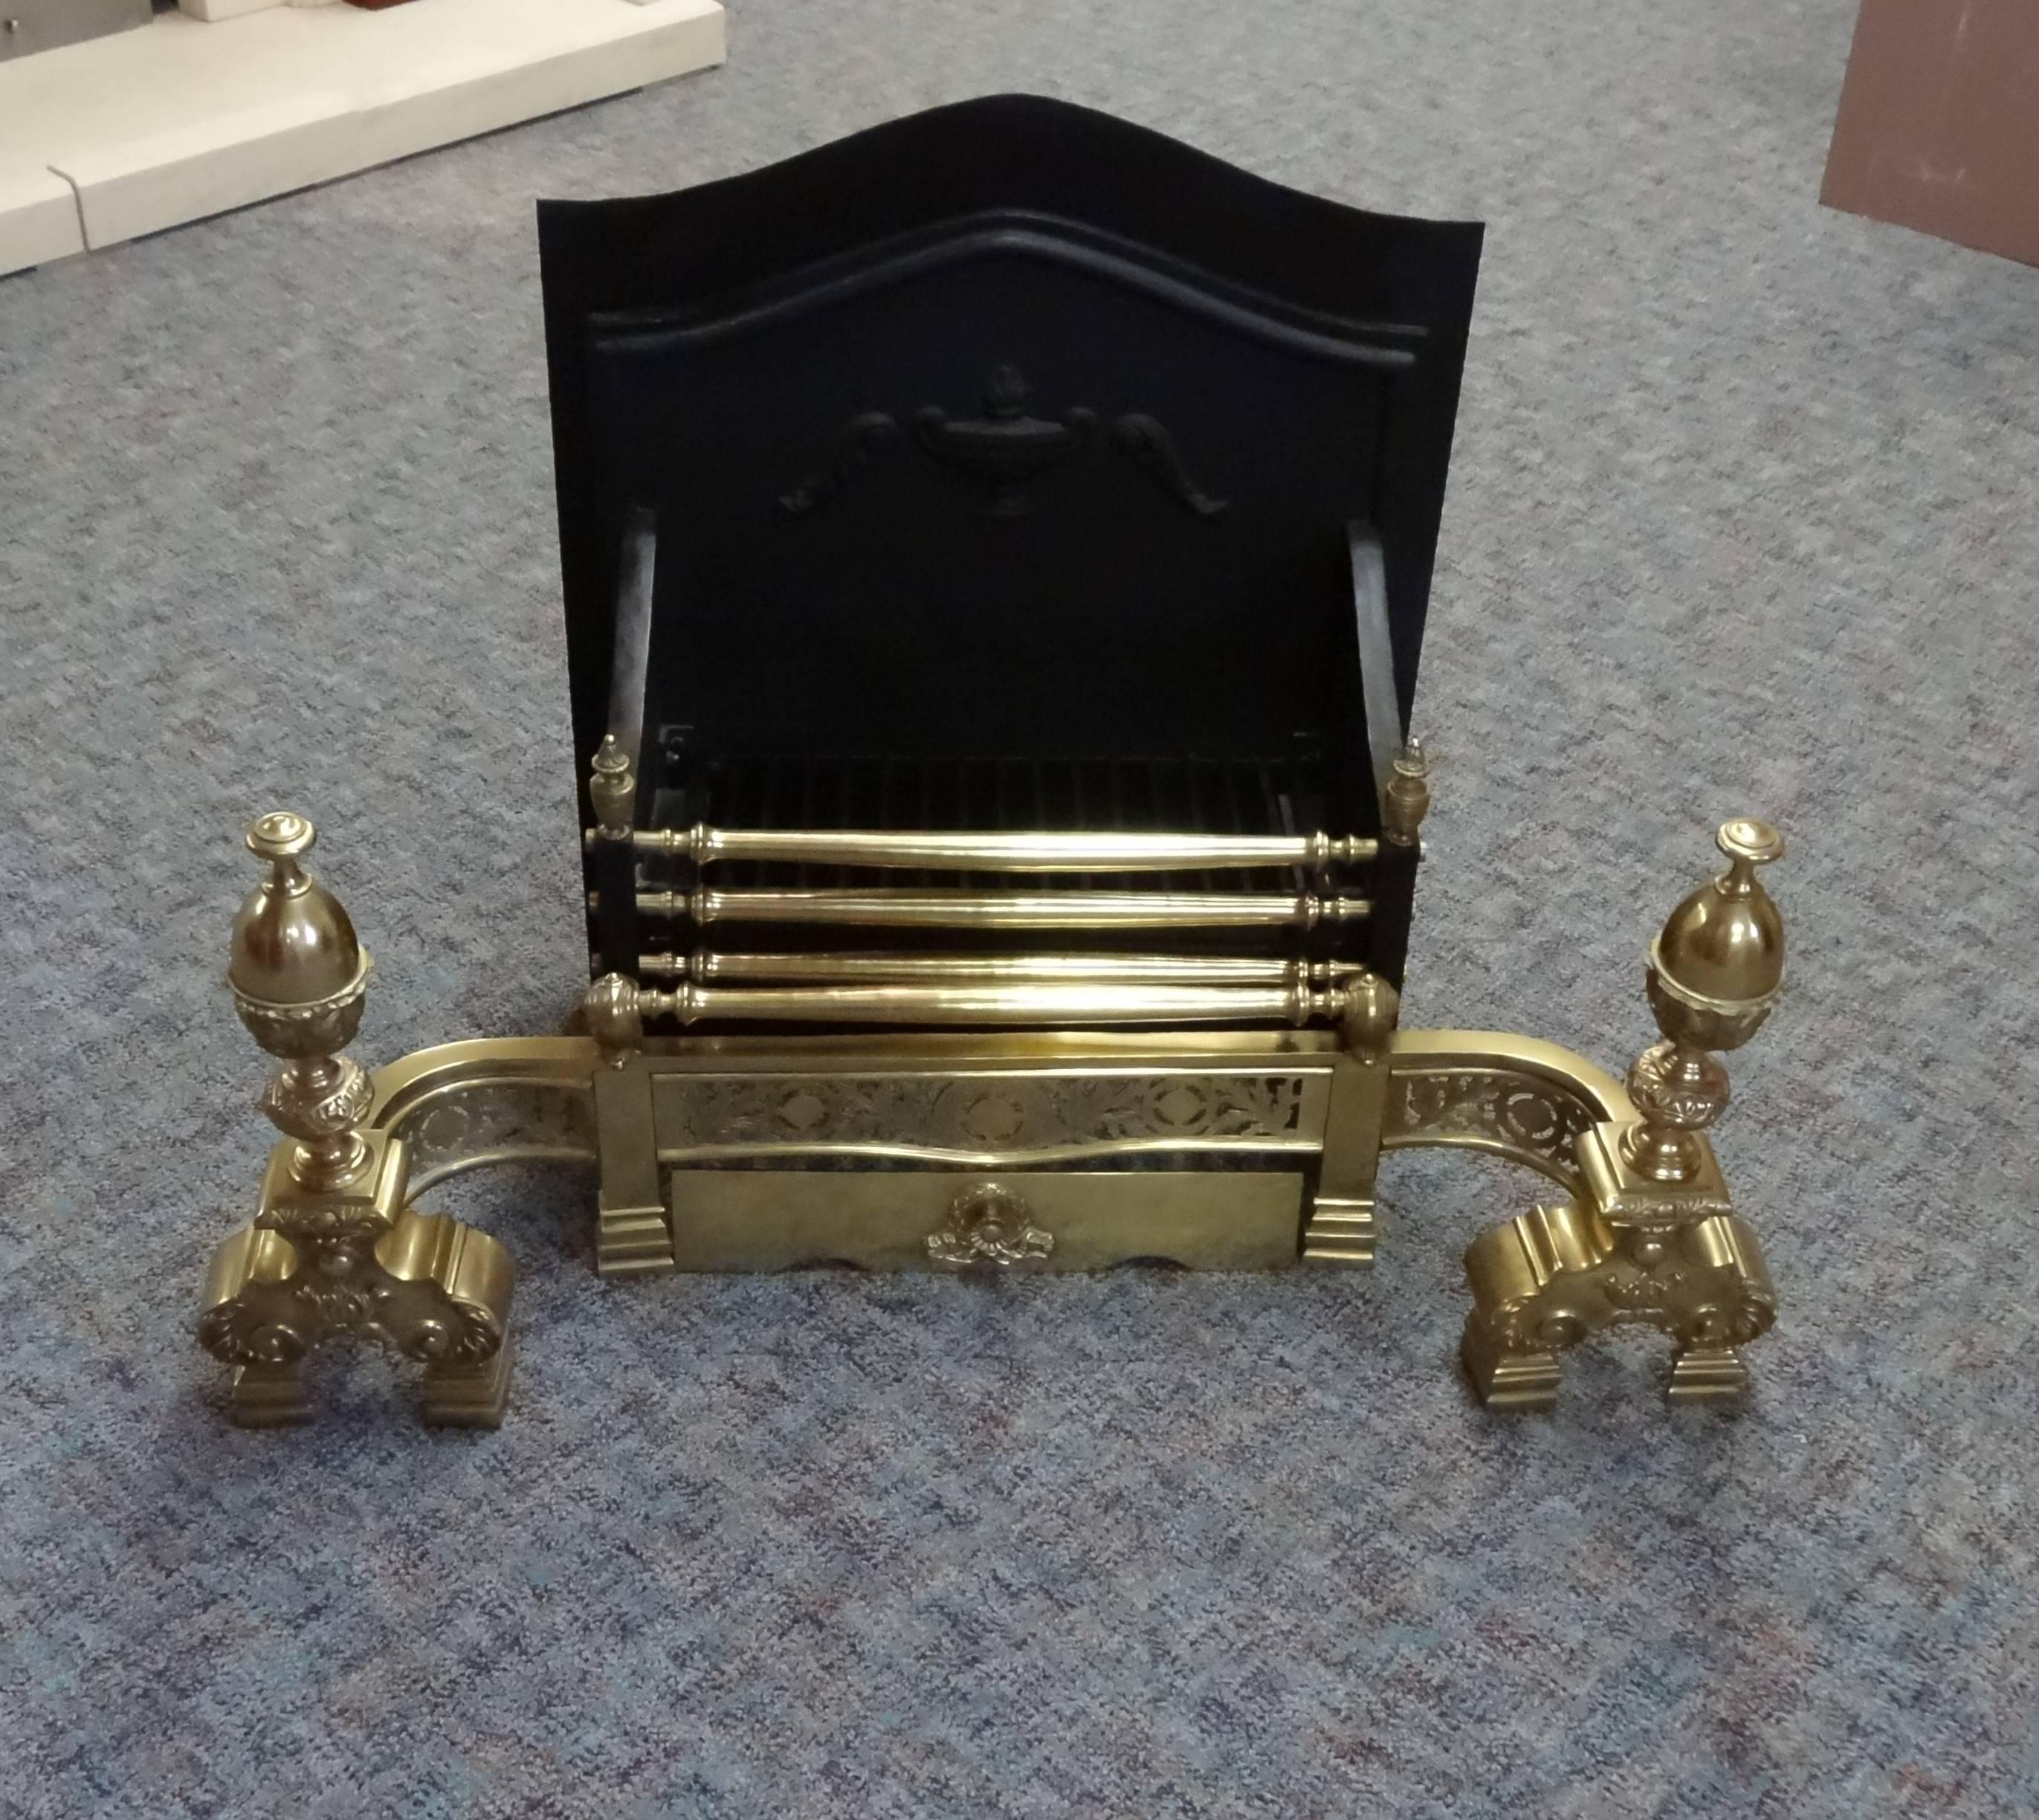 21st century Victorian style solid brass and iron dog grate fire basket.